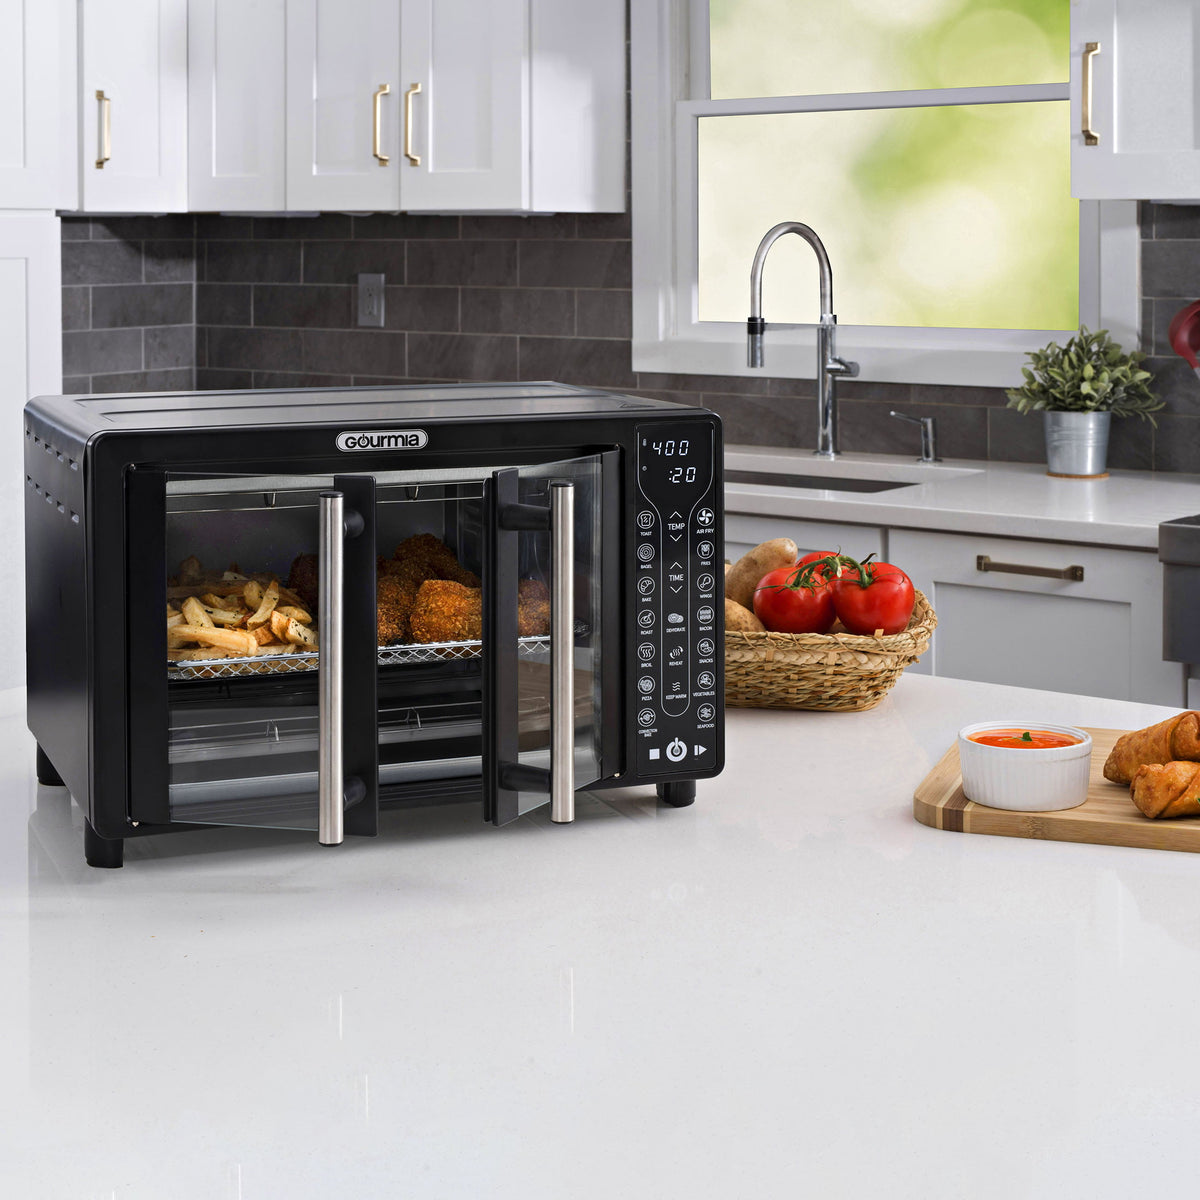 Convection Countertop Oven - Digital French Toaster Oven Air Fryer